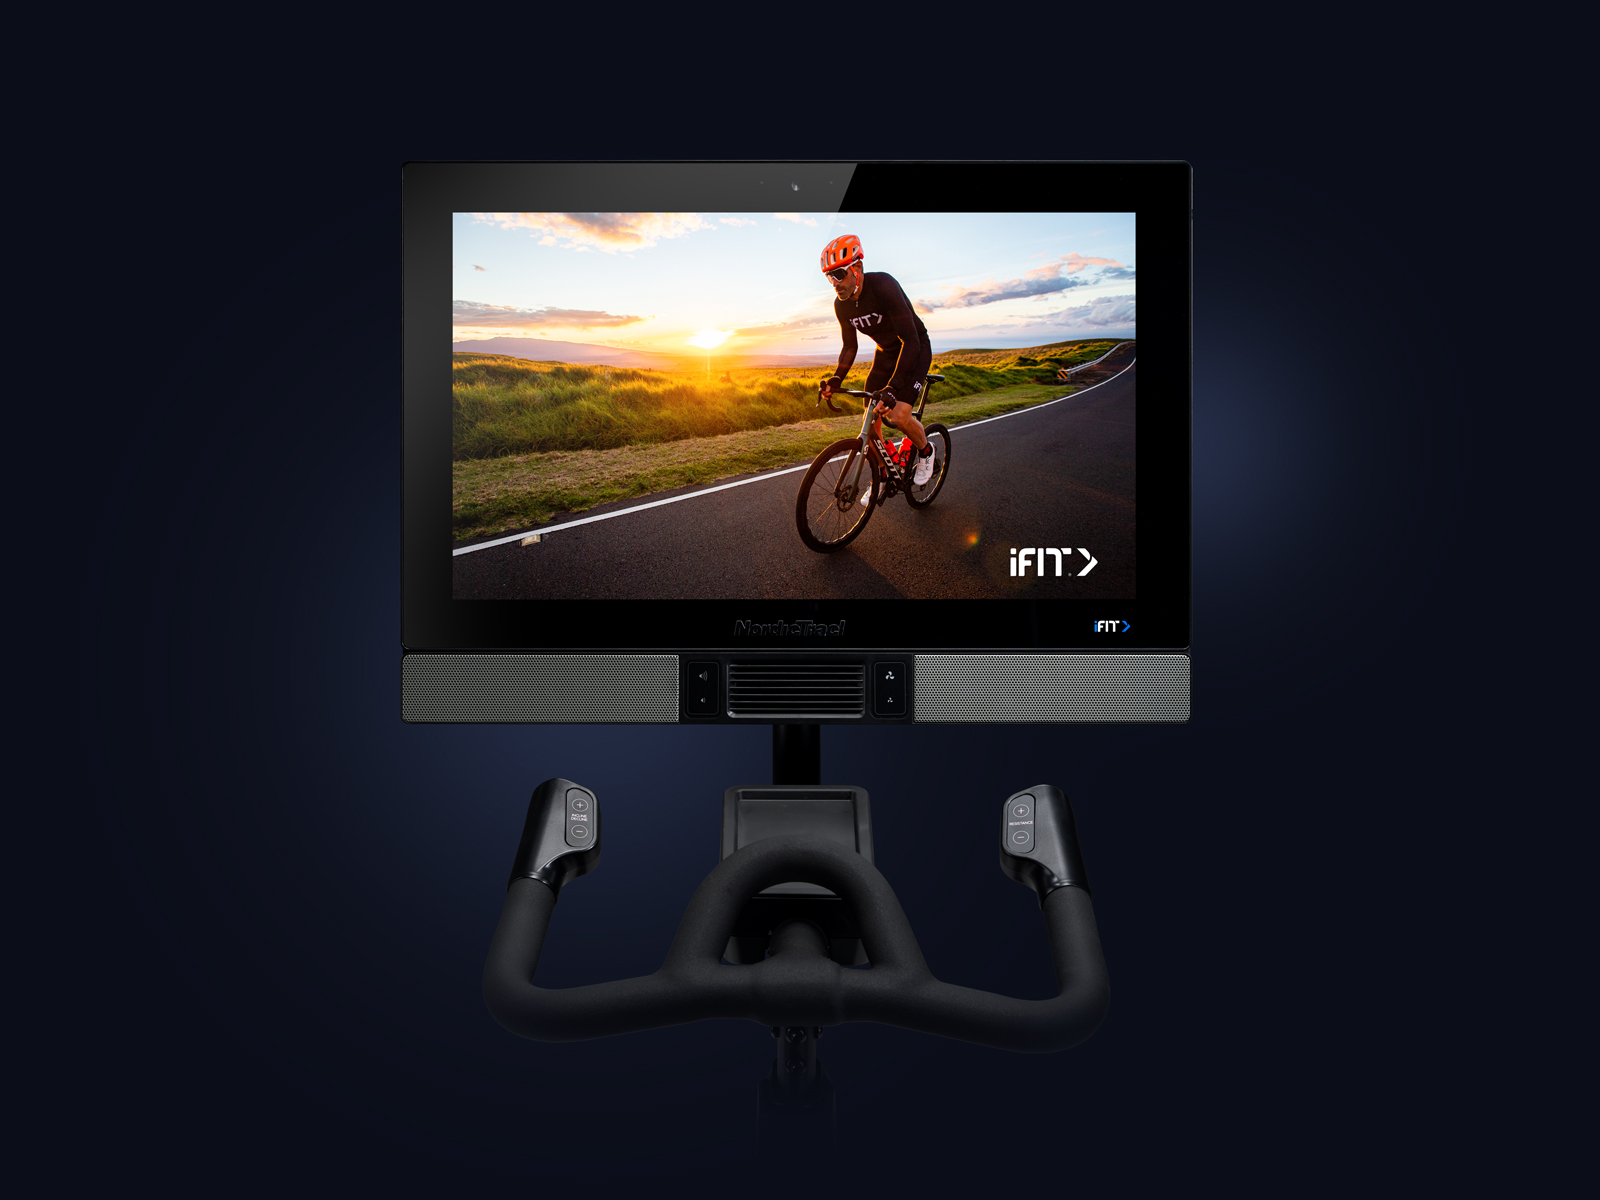 Top half of bike shown including screen and handlebars. iFIT trainer is riding a bike on the screen.